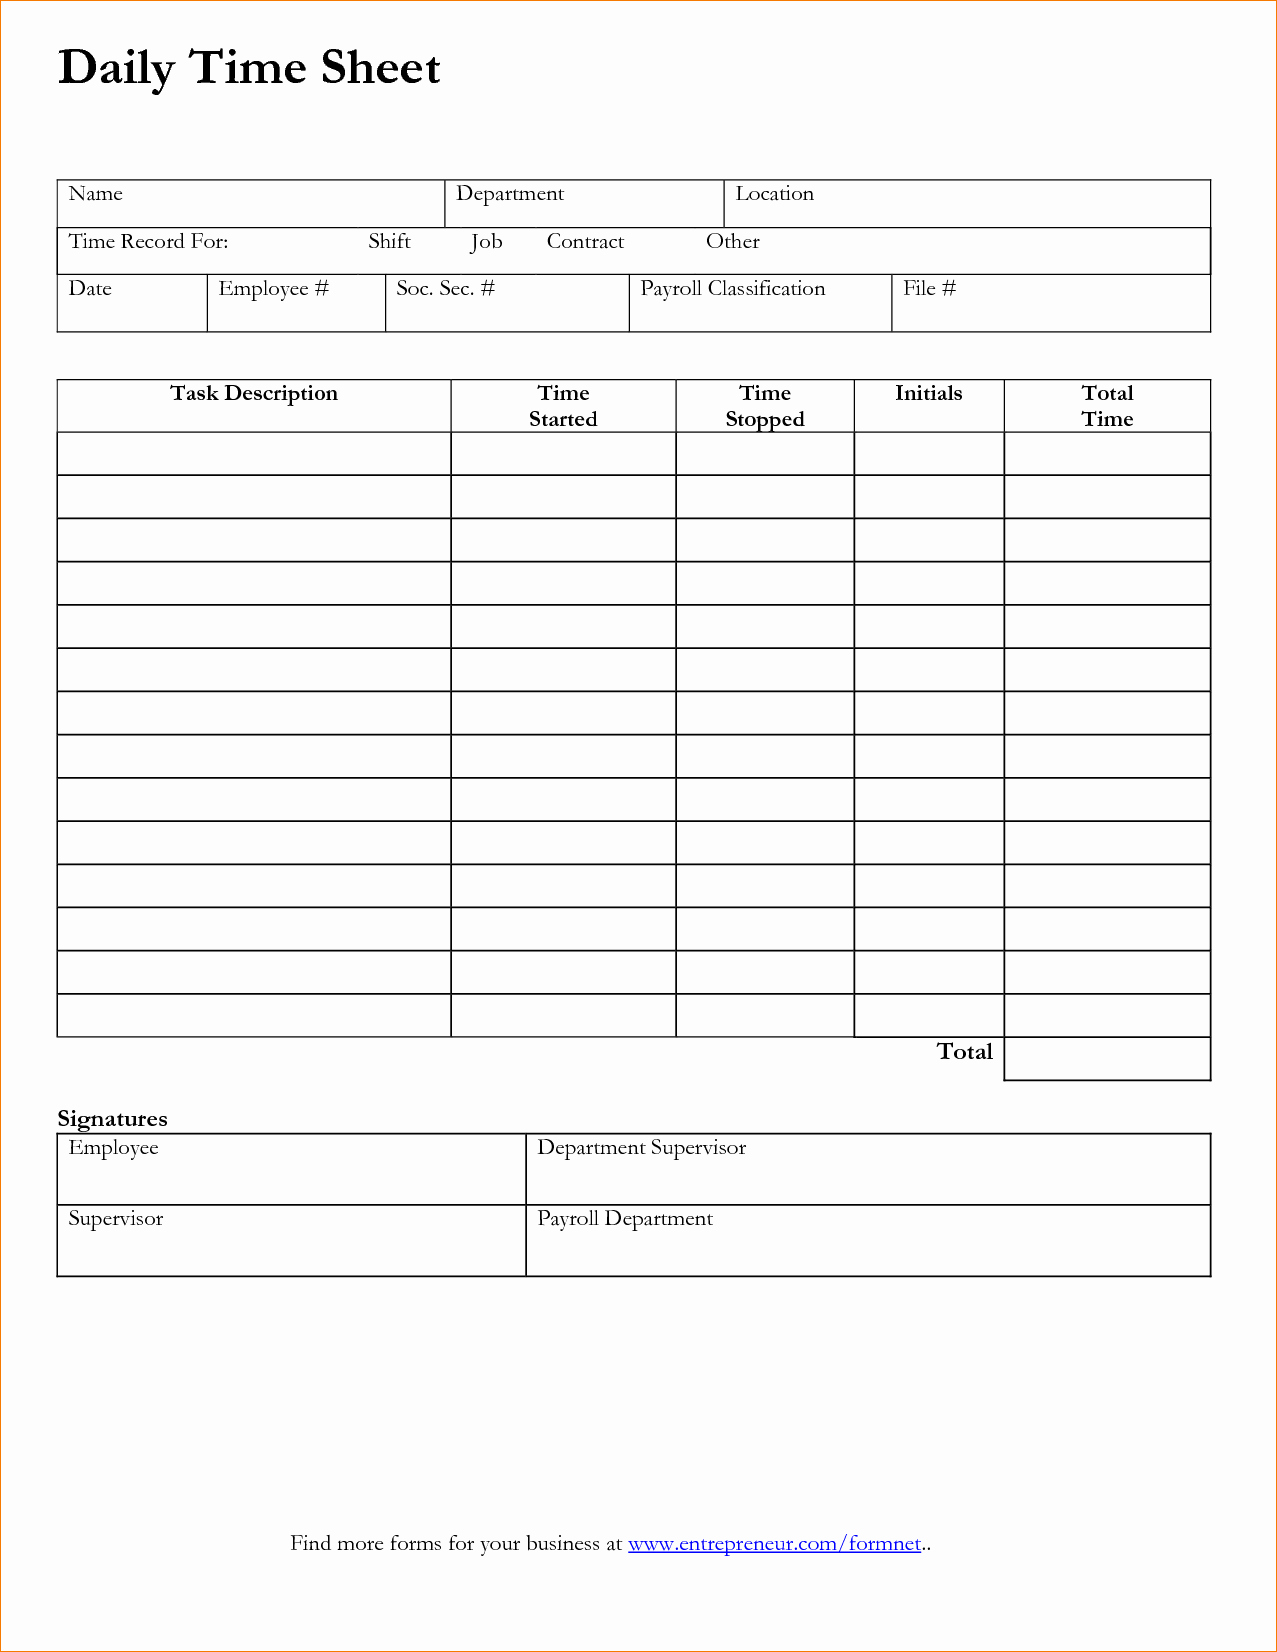 Daily Time Card Template Excel Elegant 5 Time Sheets Template